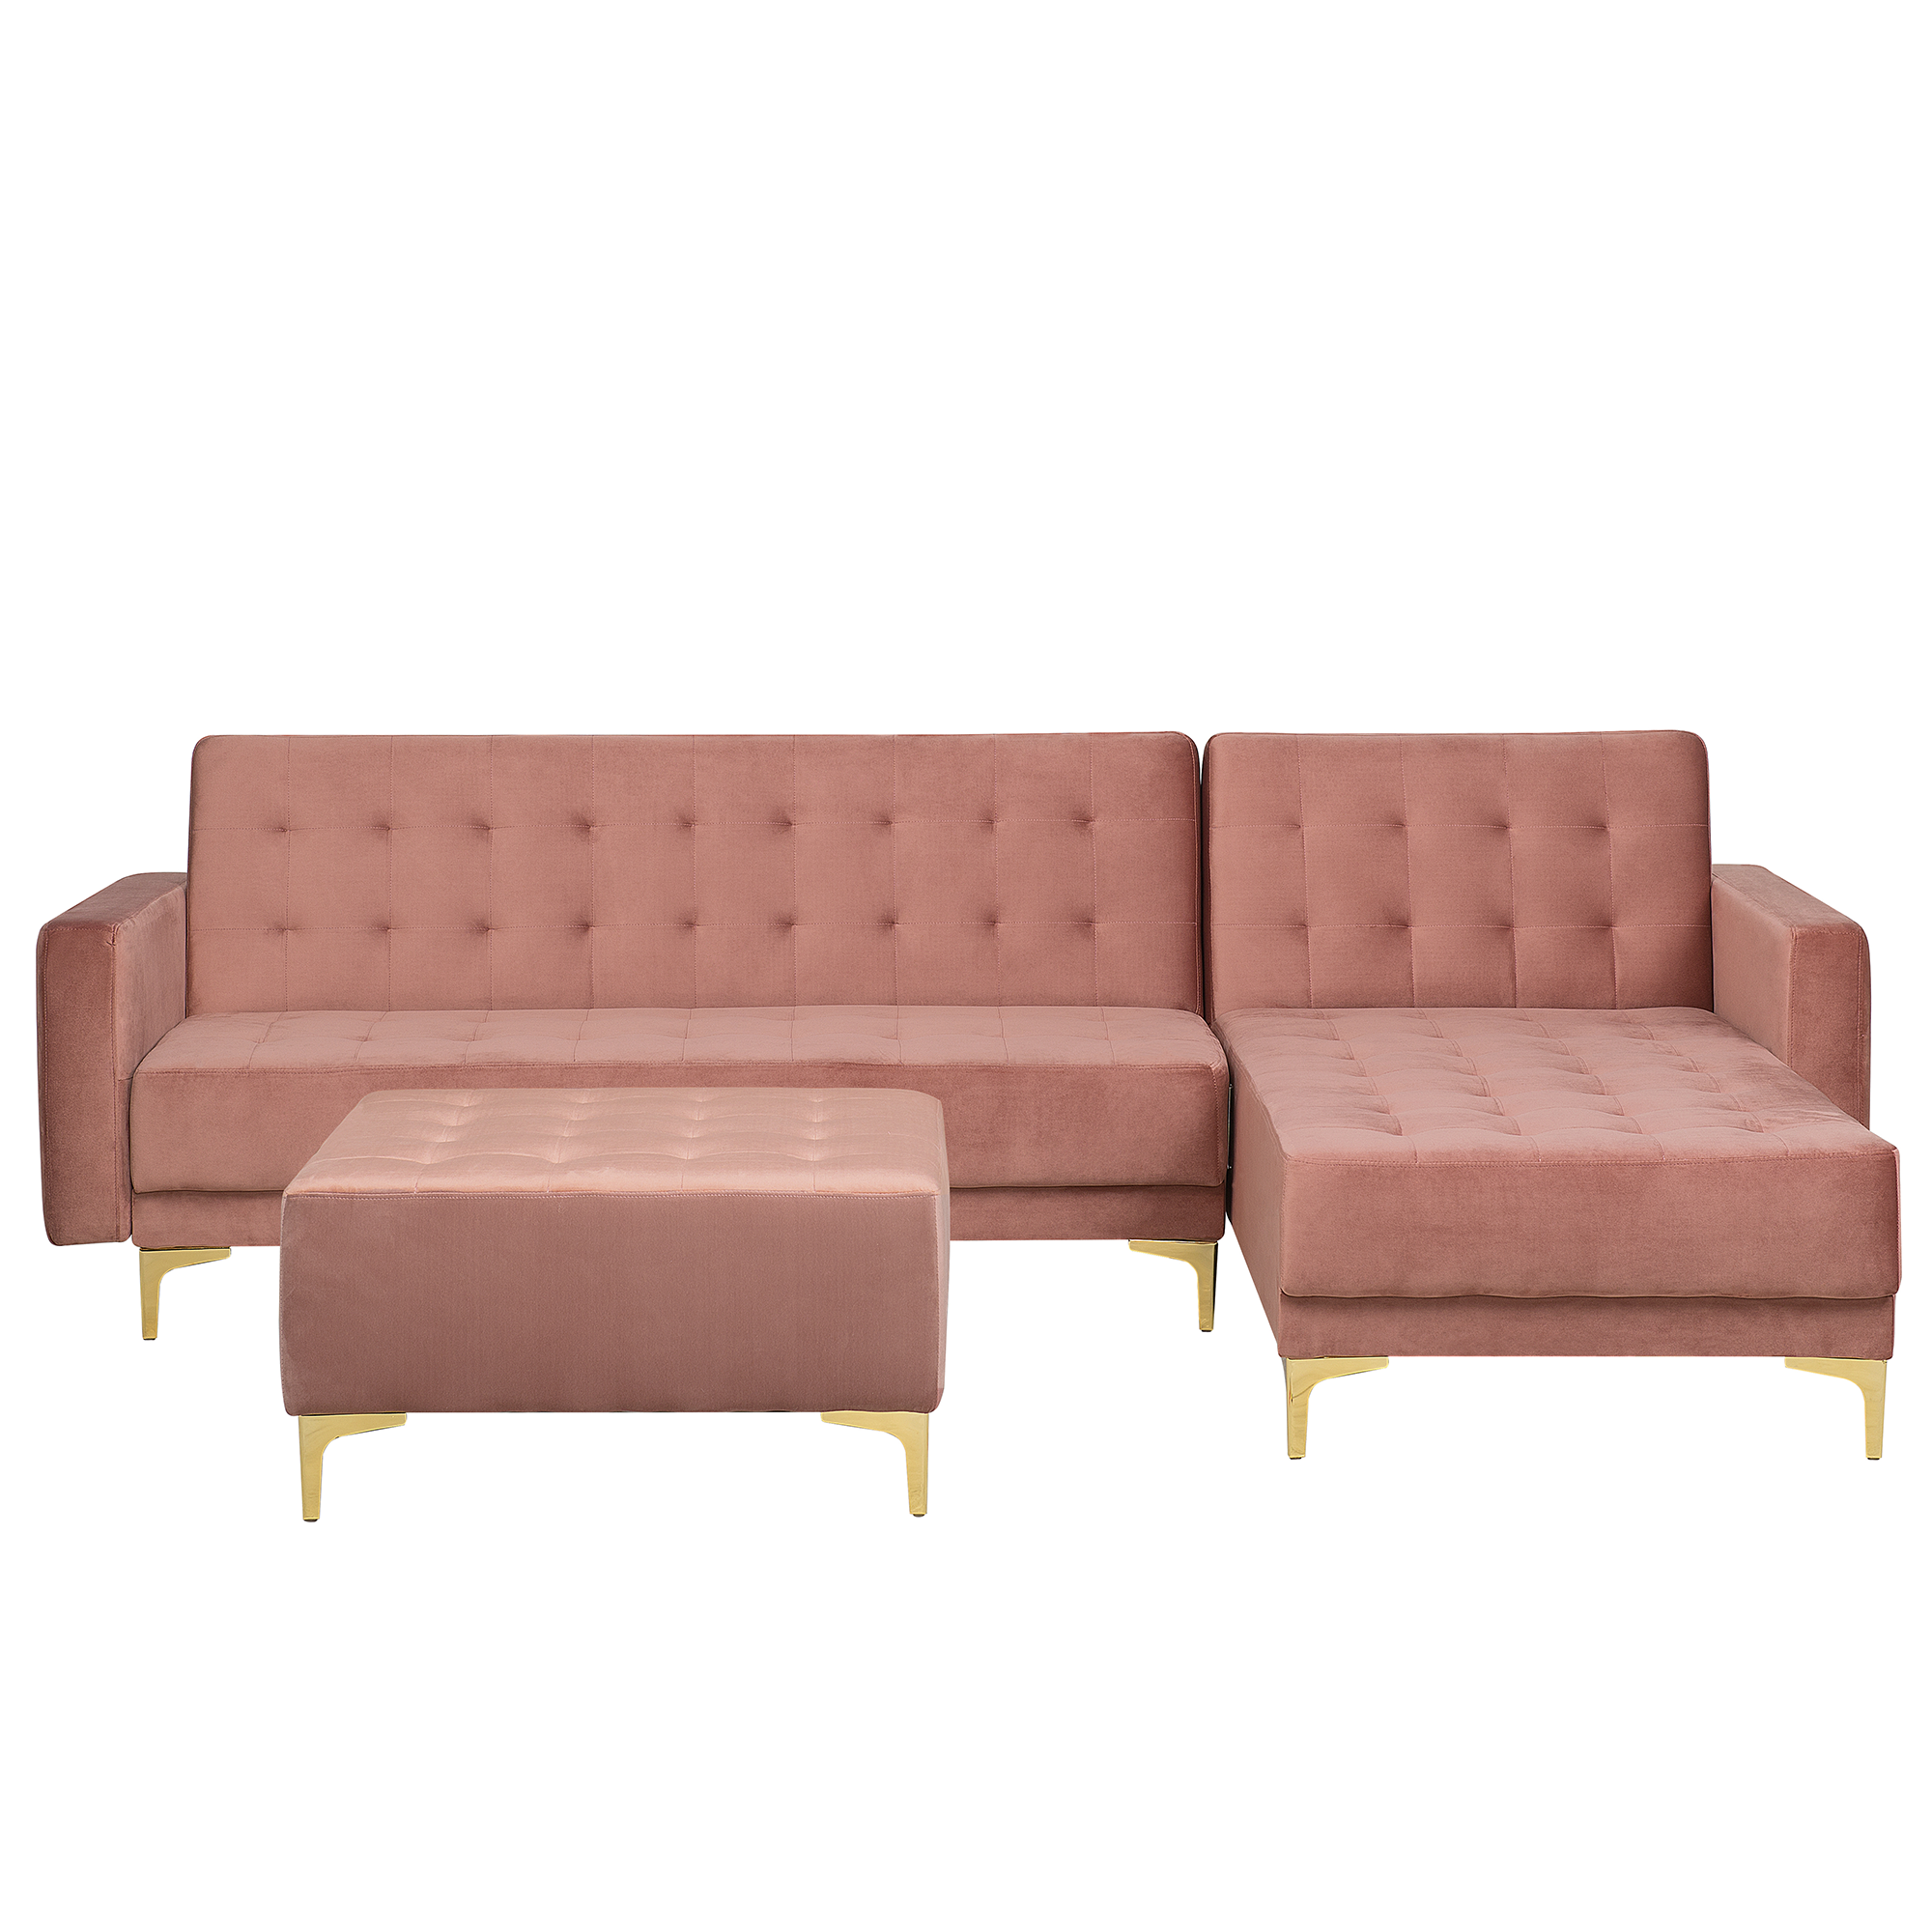 Beliani Corner Sofa Bed Pink Velvet Tufted Fabric Modern L-Shaped Modular 4 Seater with Ottoman Left Hand Chaise Longue